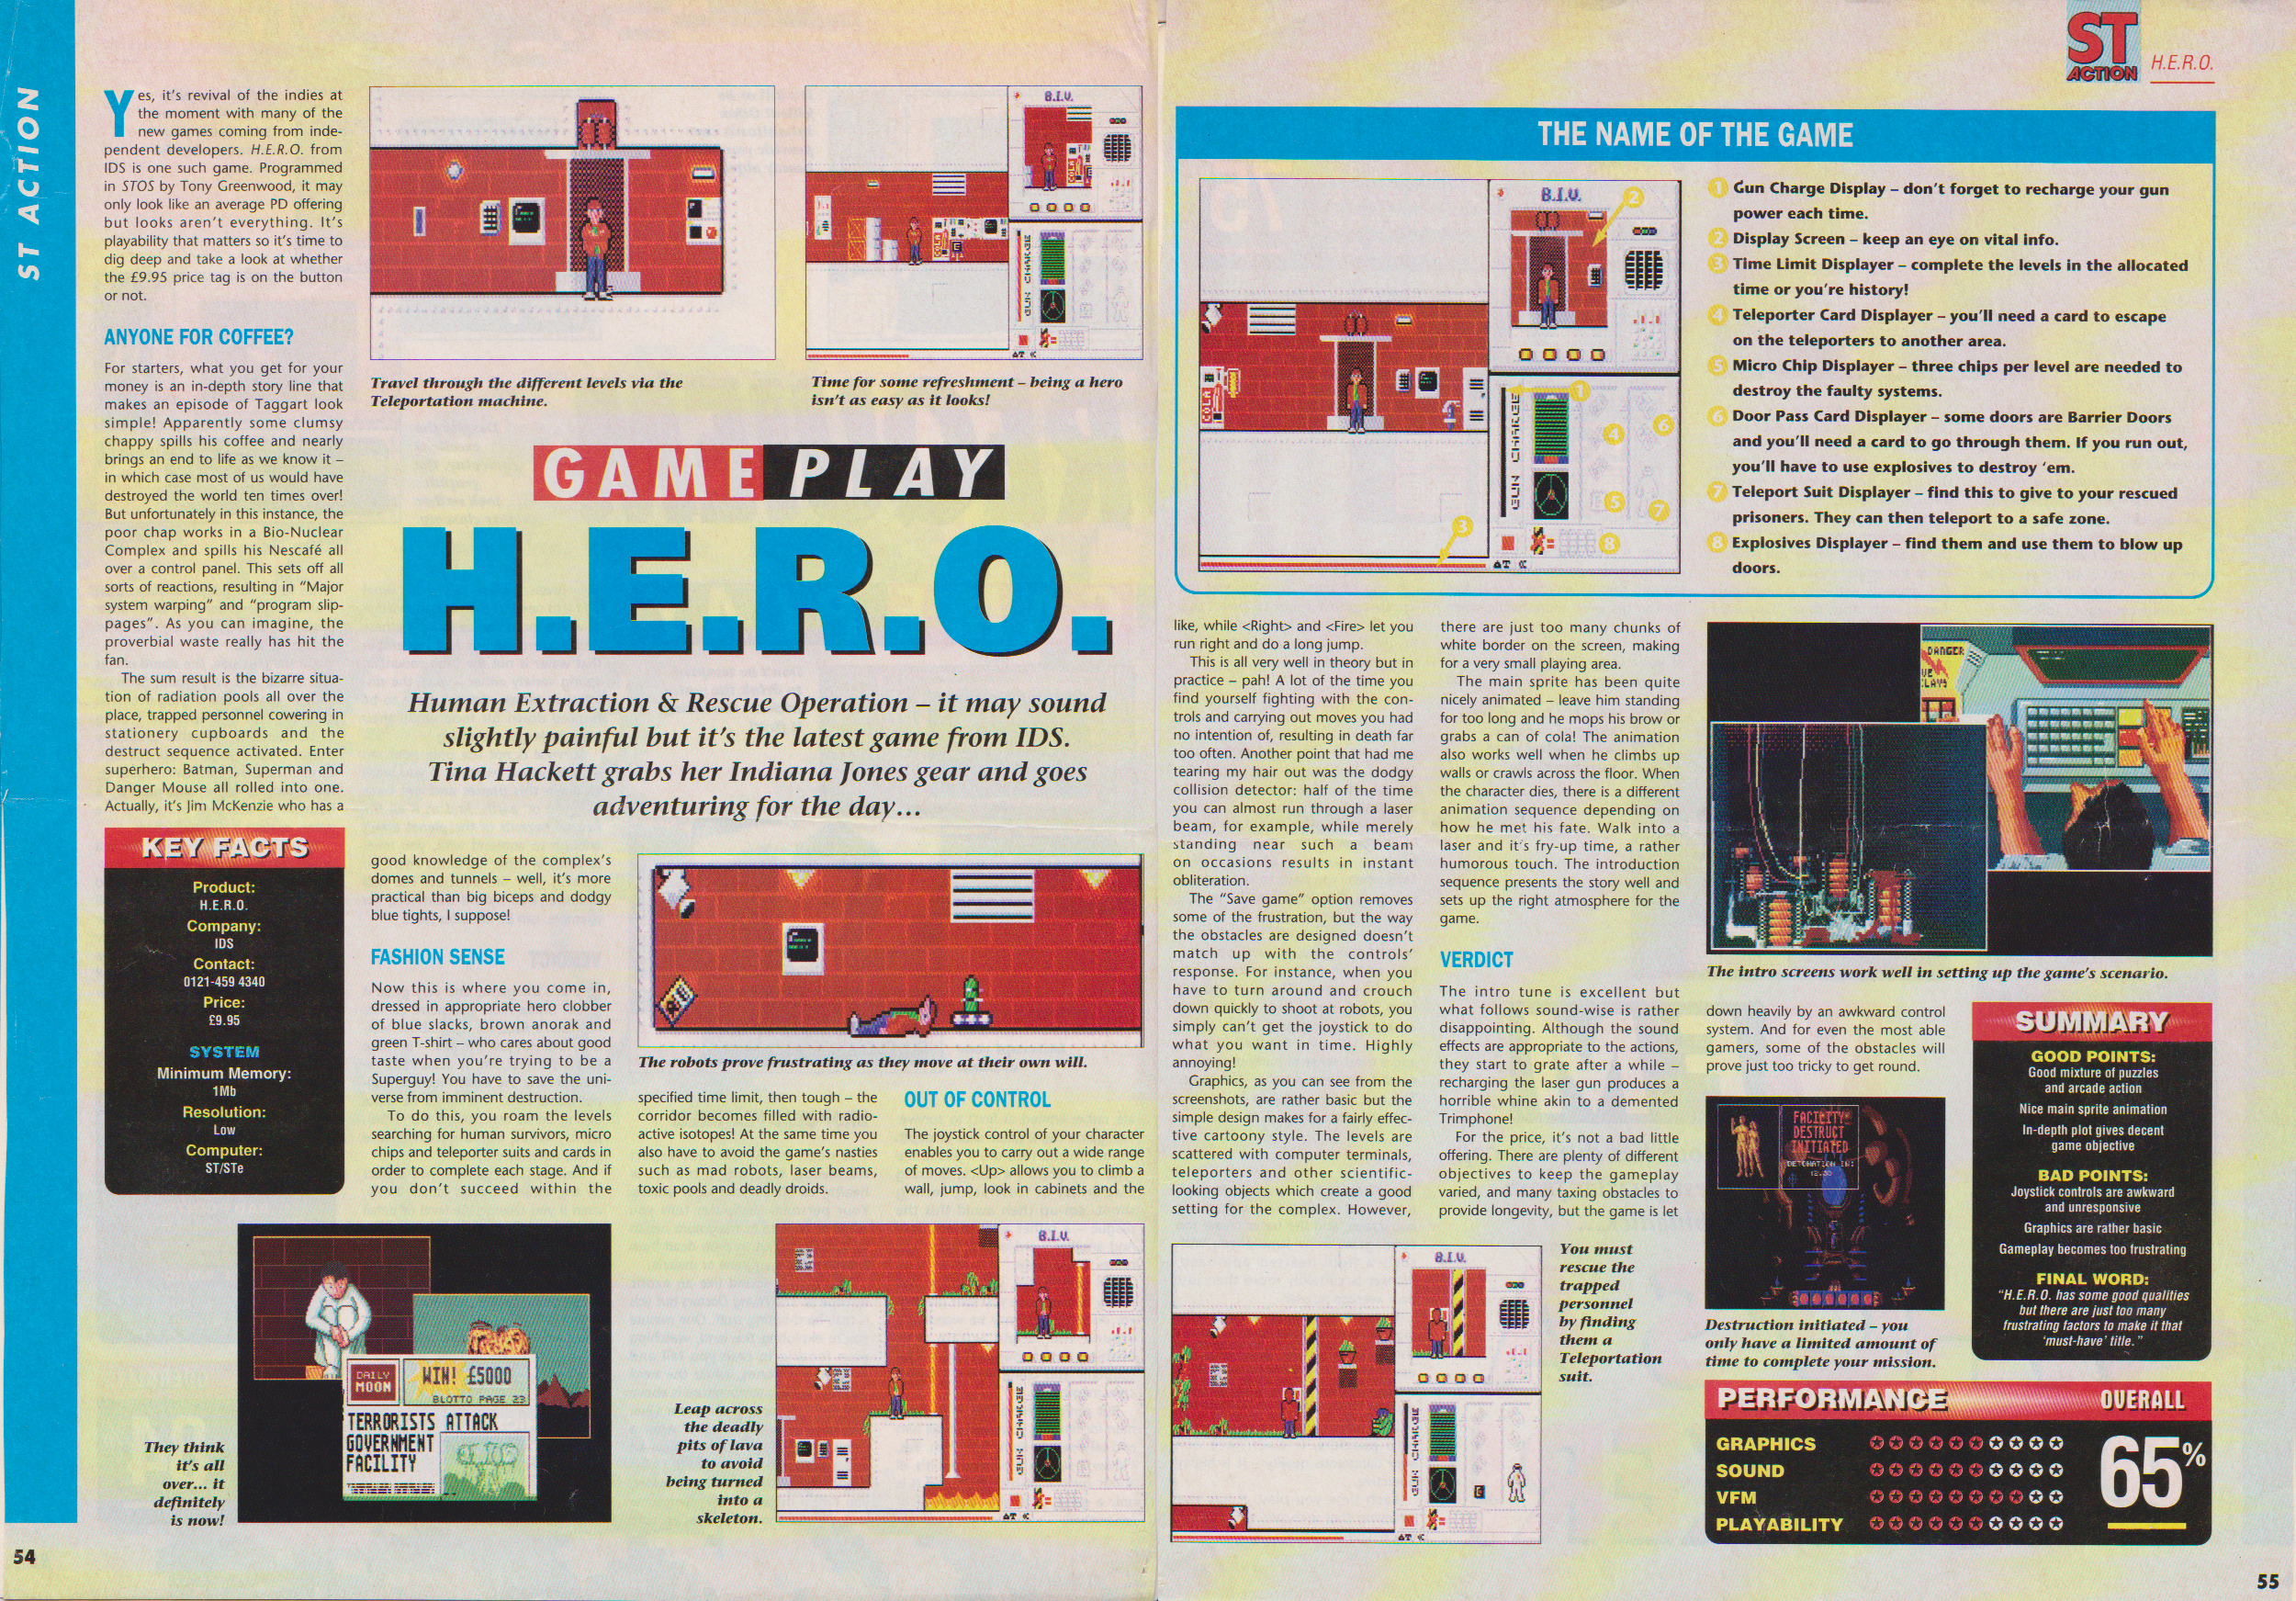 H.E.R.O. in ST Action magazine.